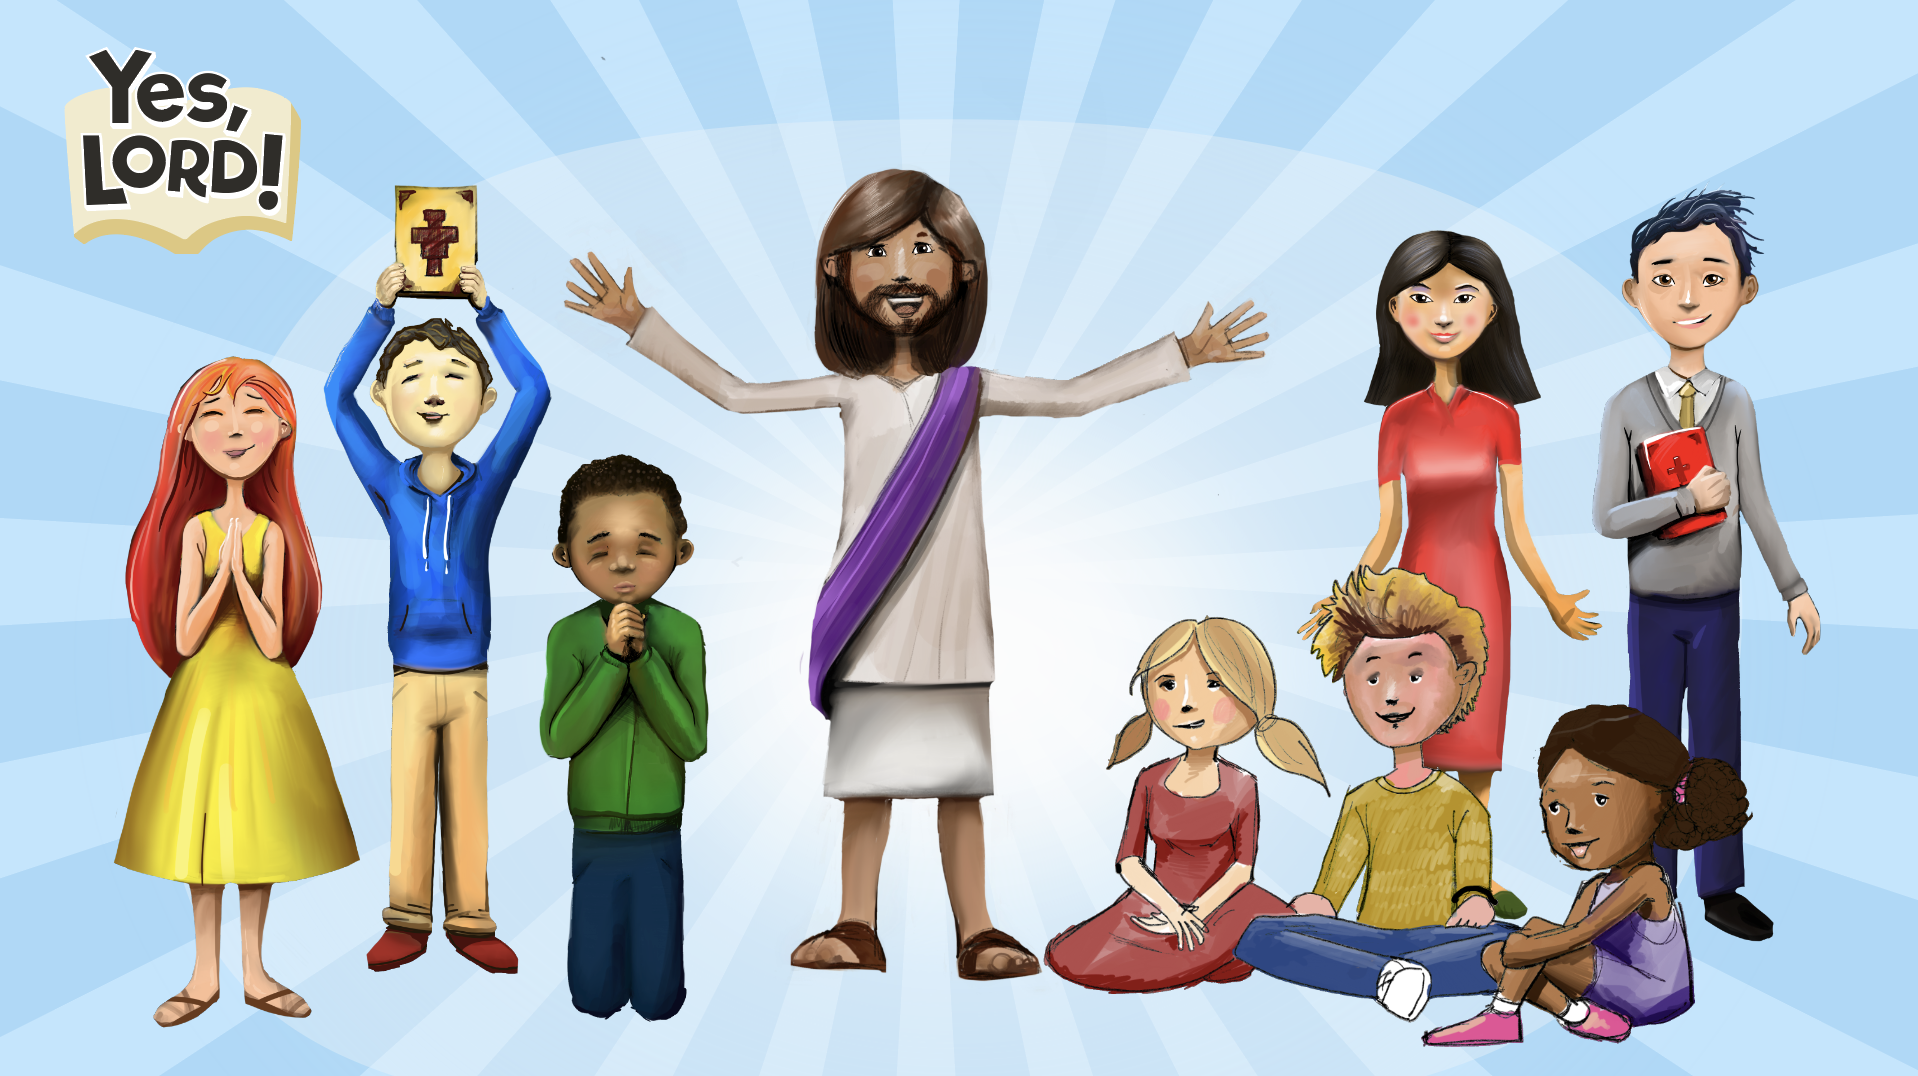 "Yes Lord" logo with Jesus and children